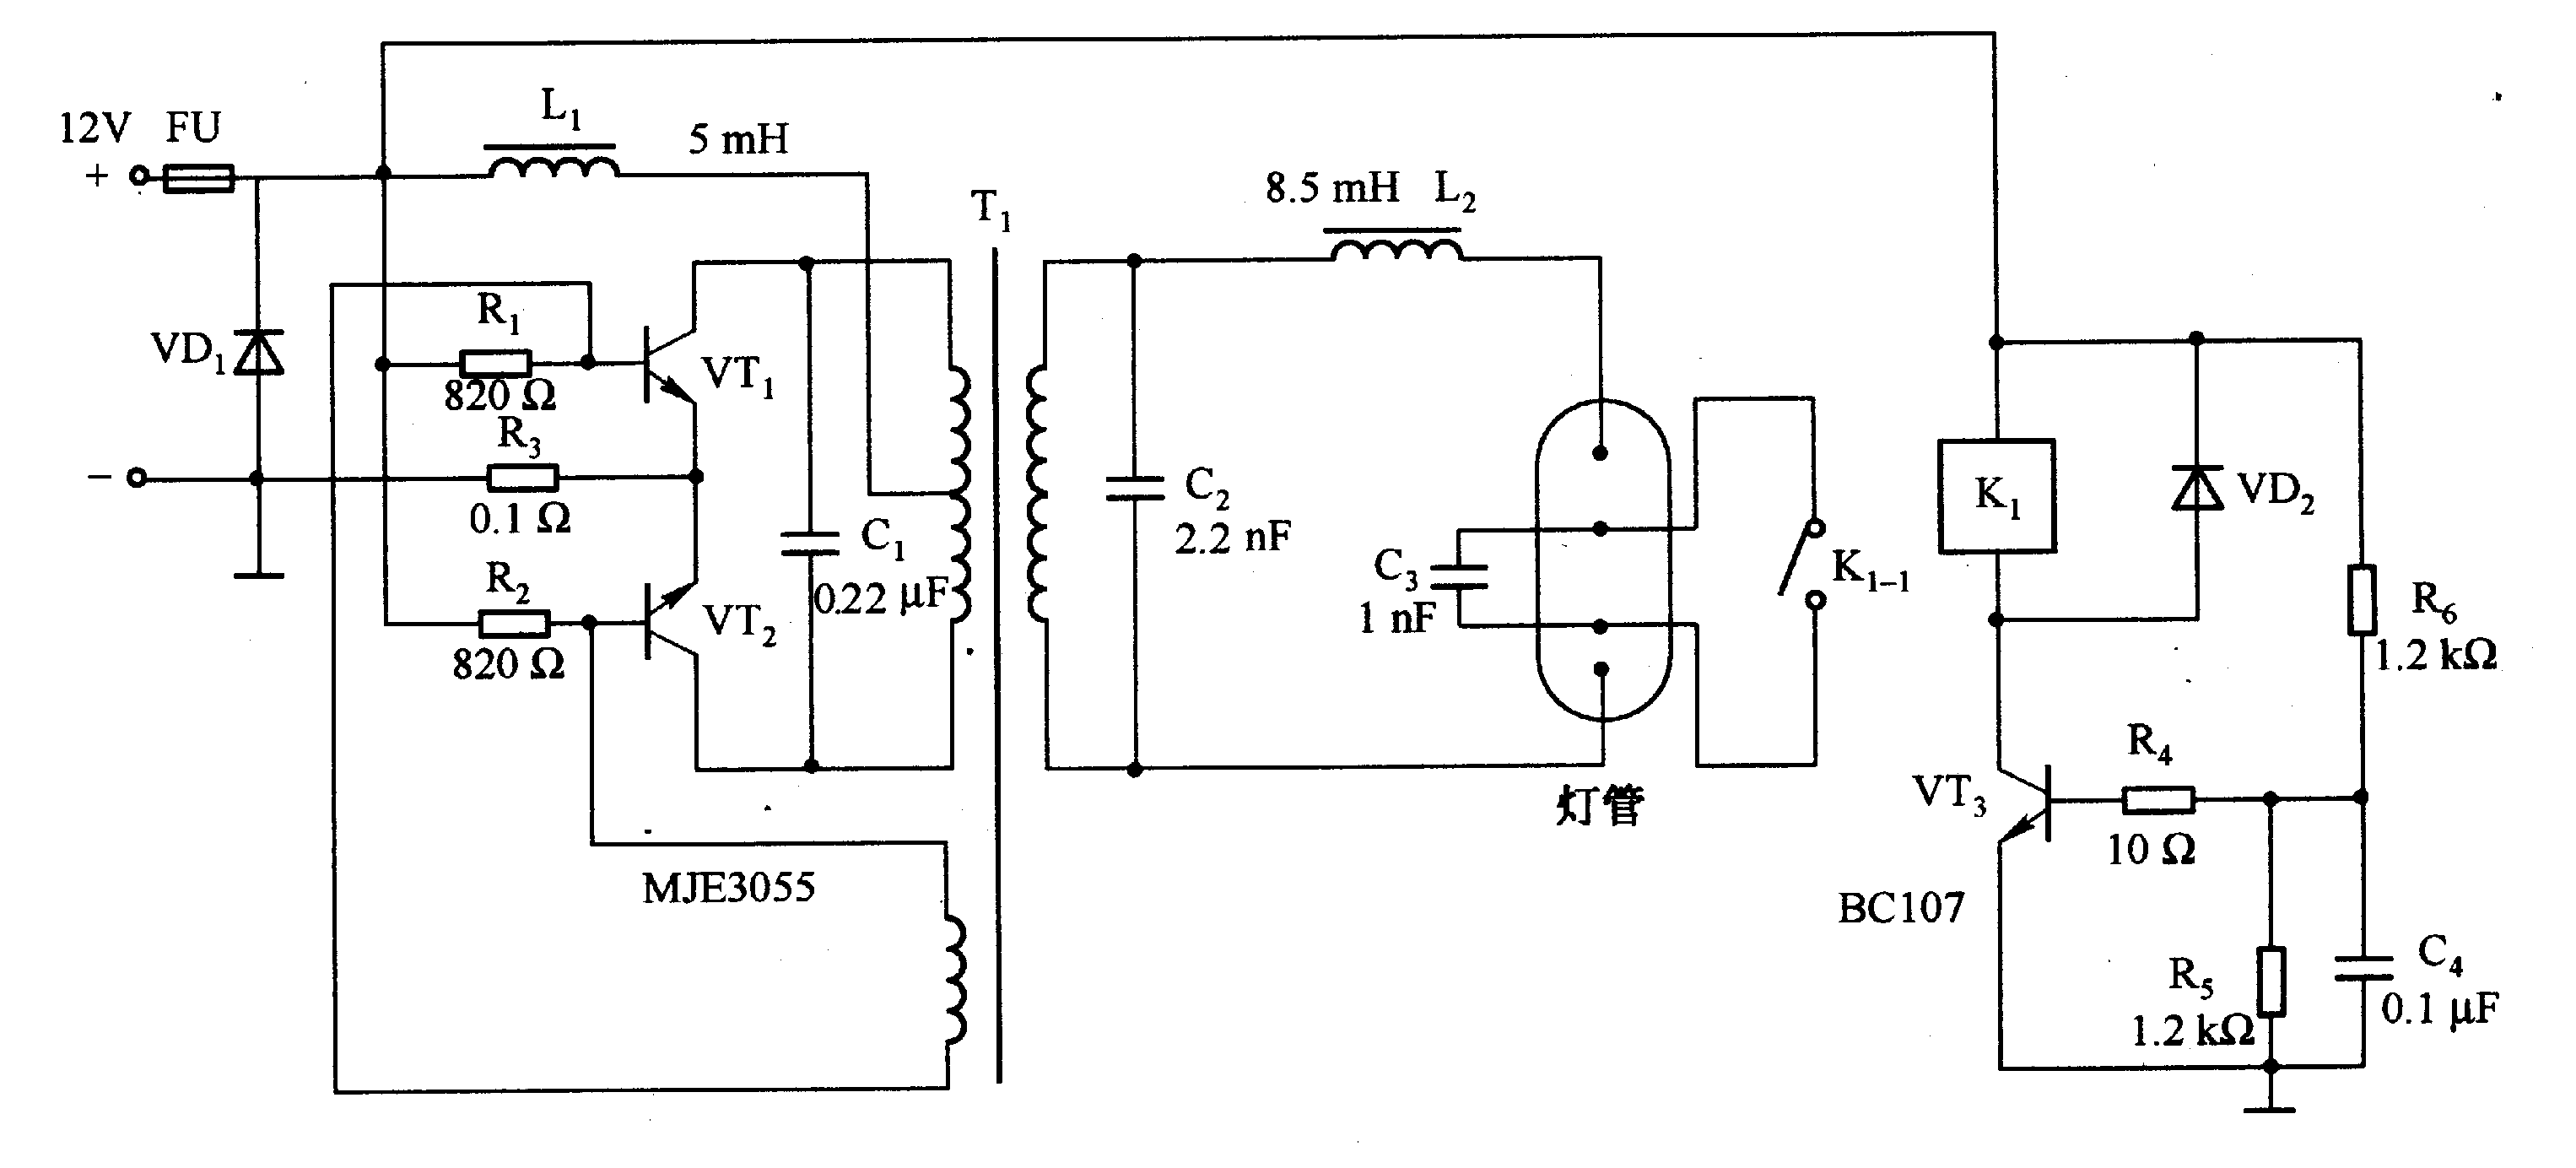 The Simple Fluorescent Lamp Driver Circuit